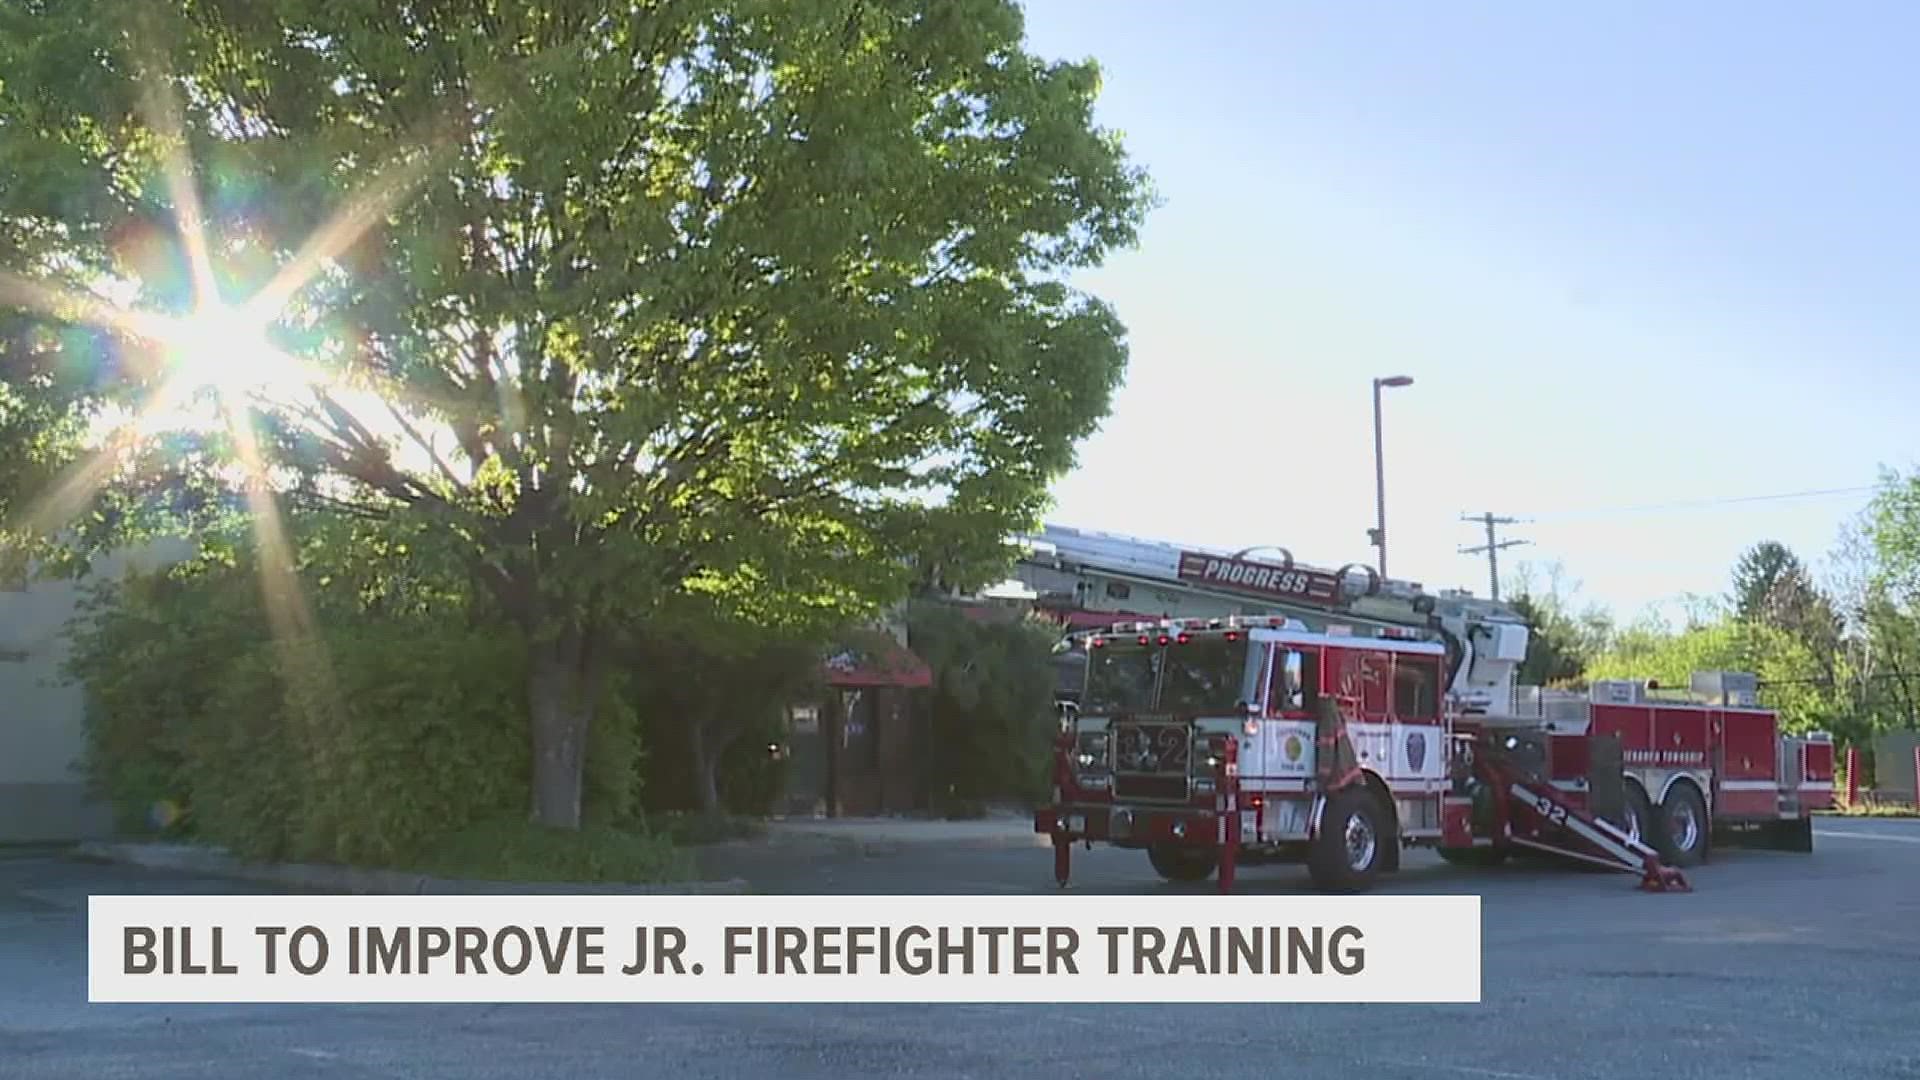 Fire companies are trying to build a pipeline of young firefighters by training high school students as junior firefighters.